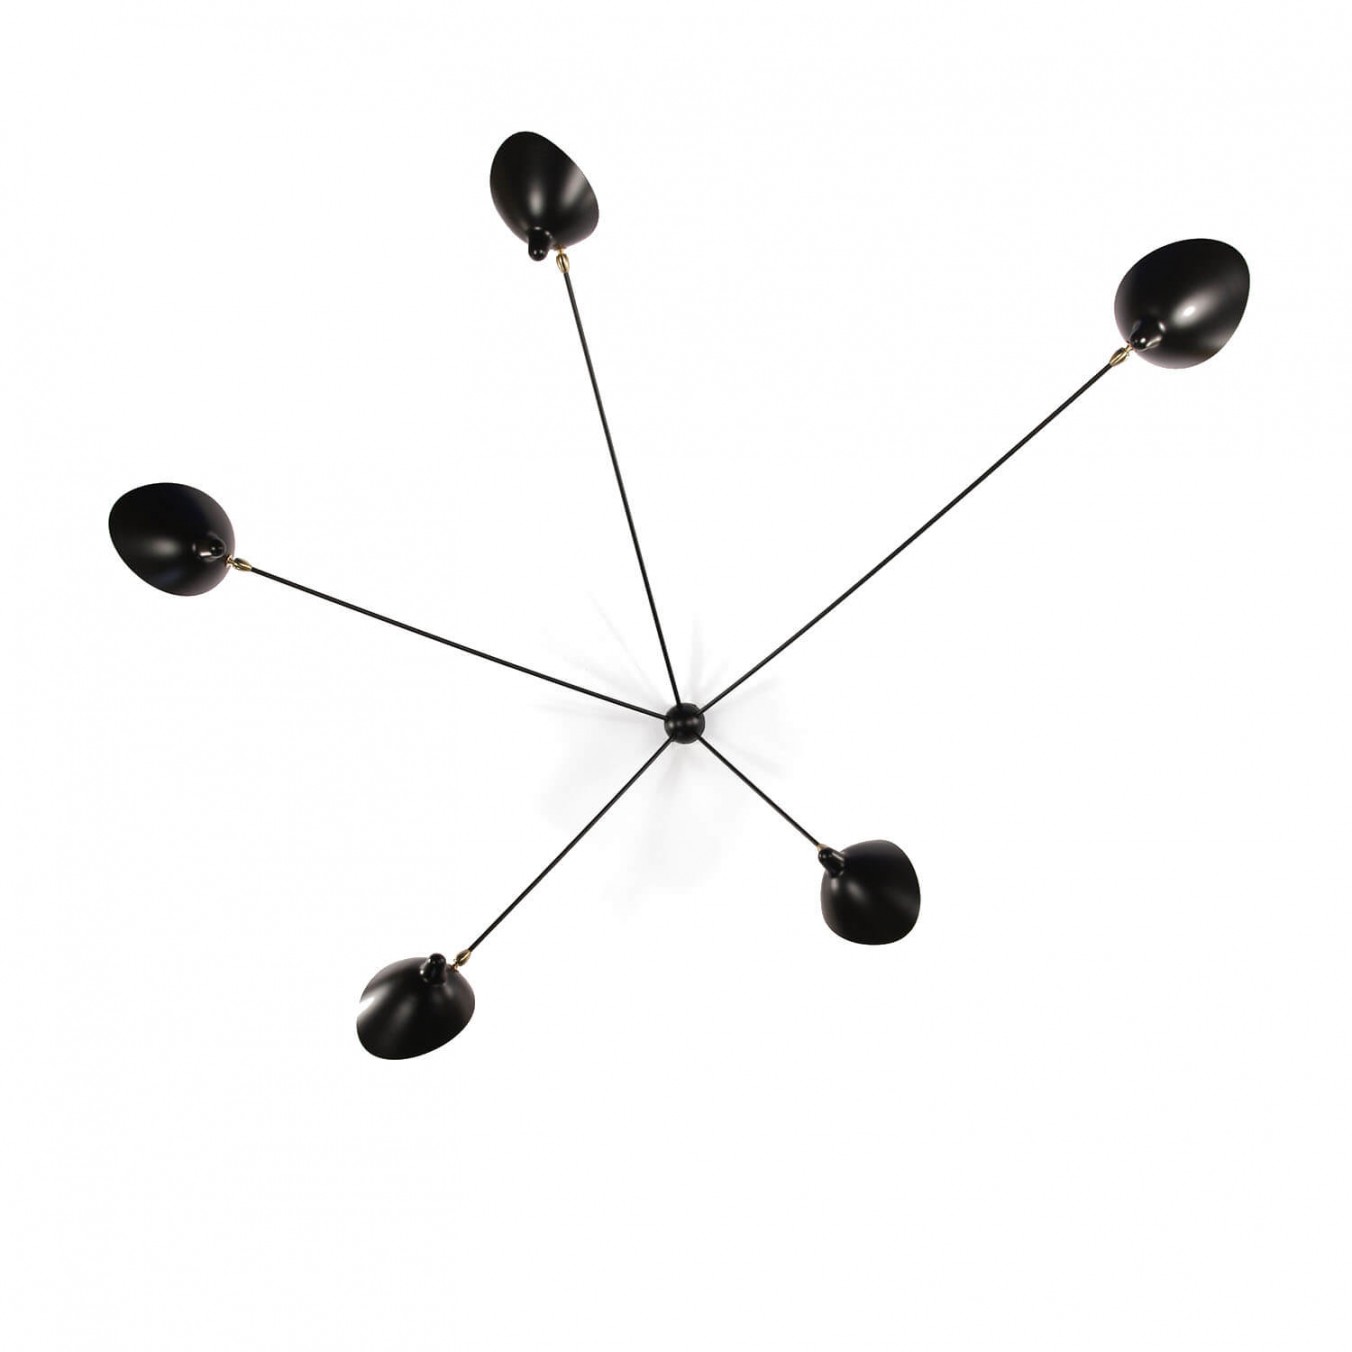 Spider Wall Light with 5 fixed arms